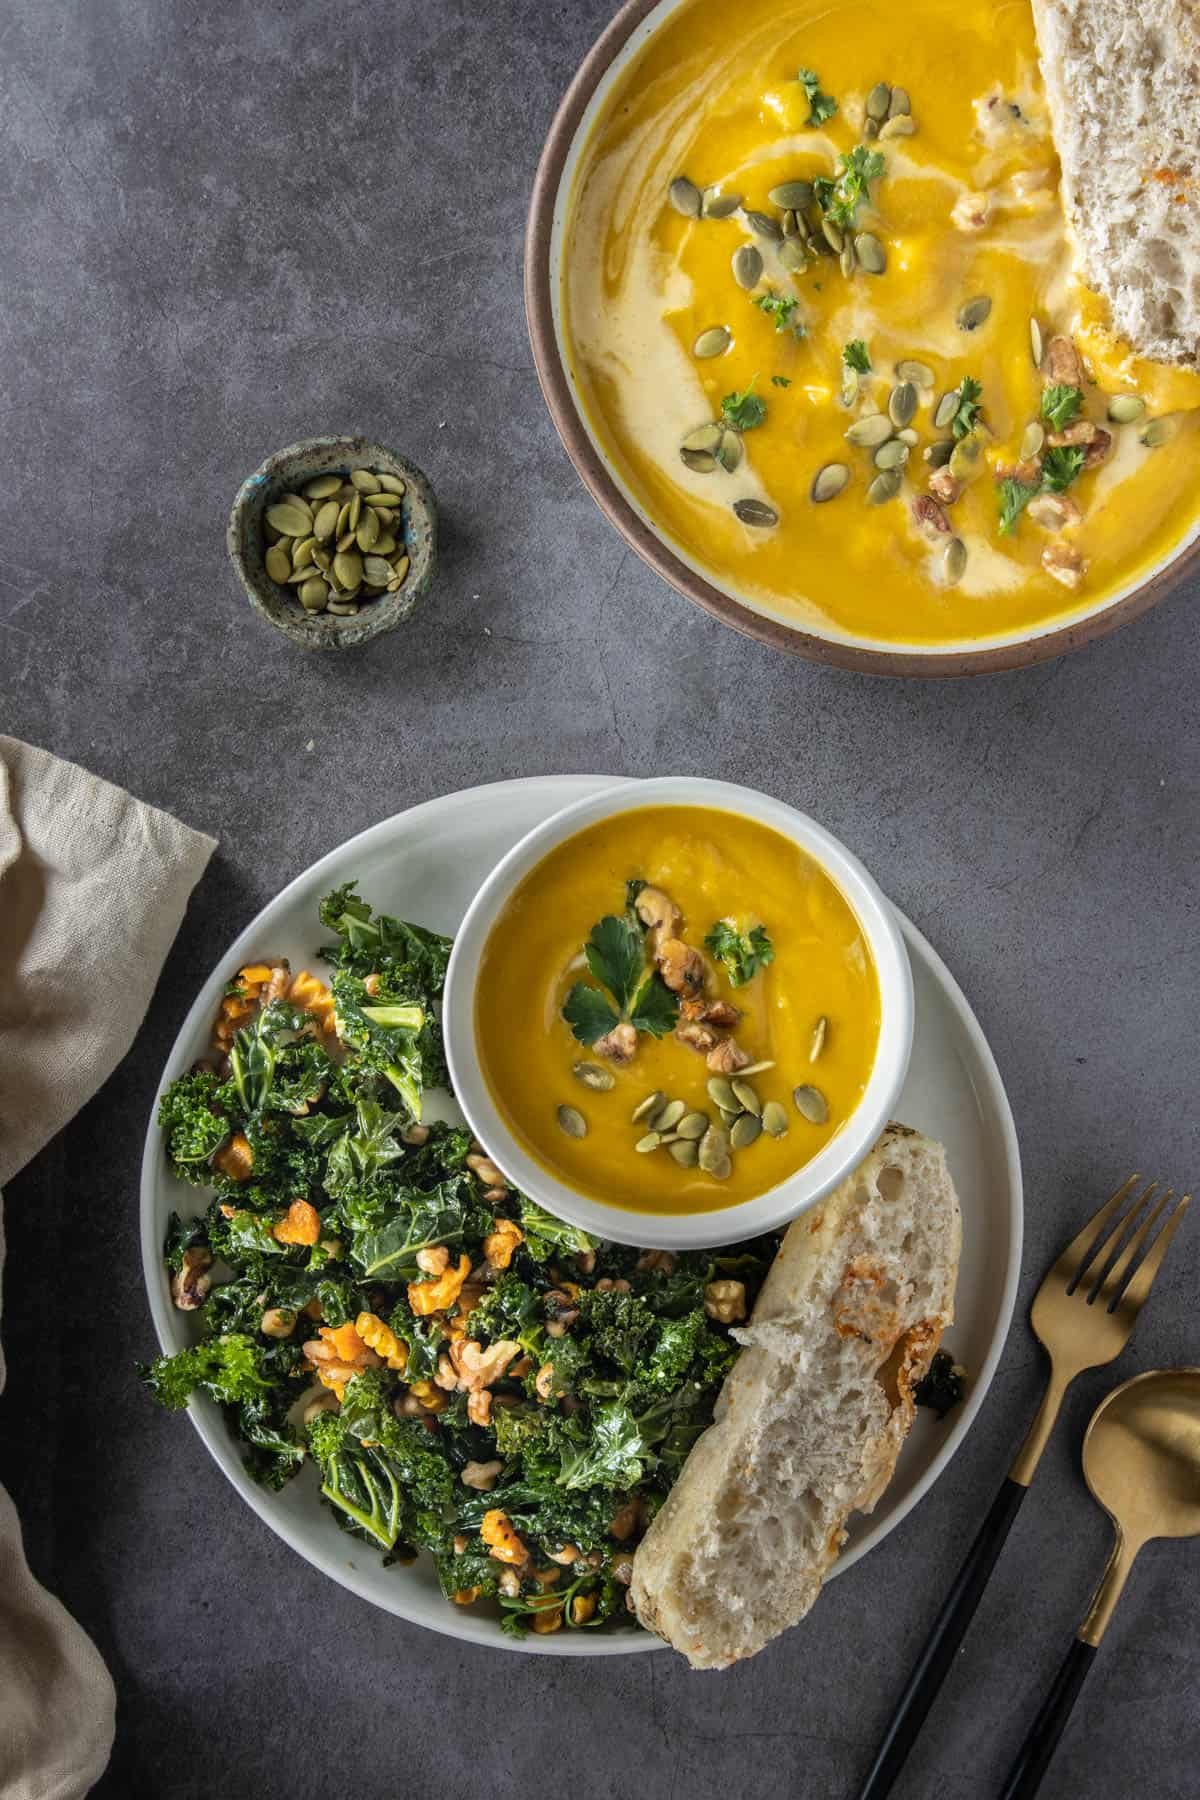 Picture of pumpkin soup with salad and bread